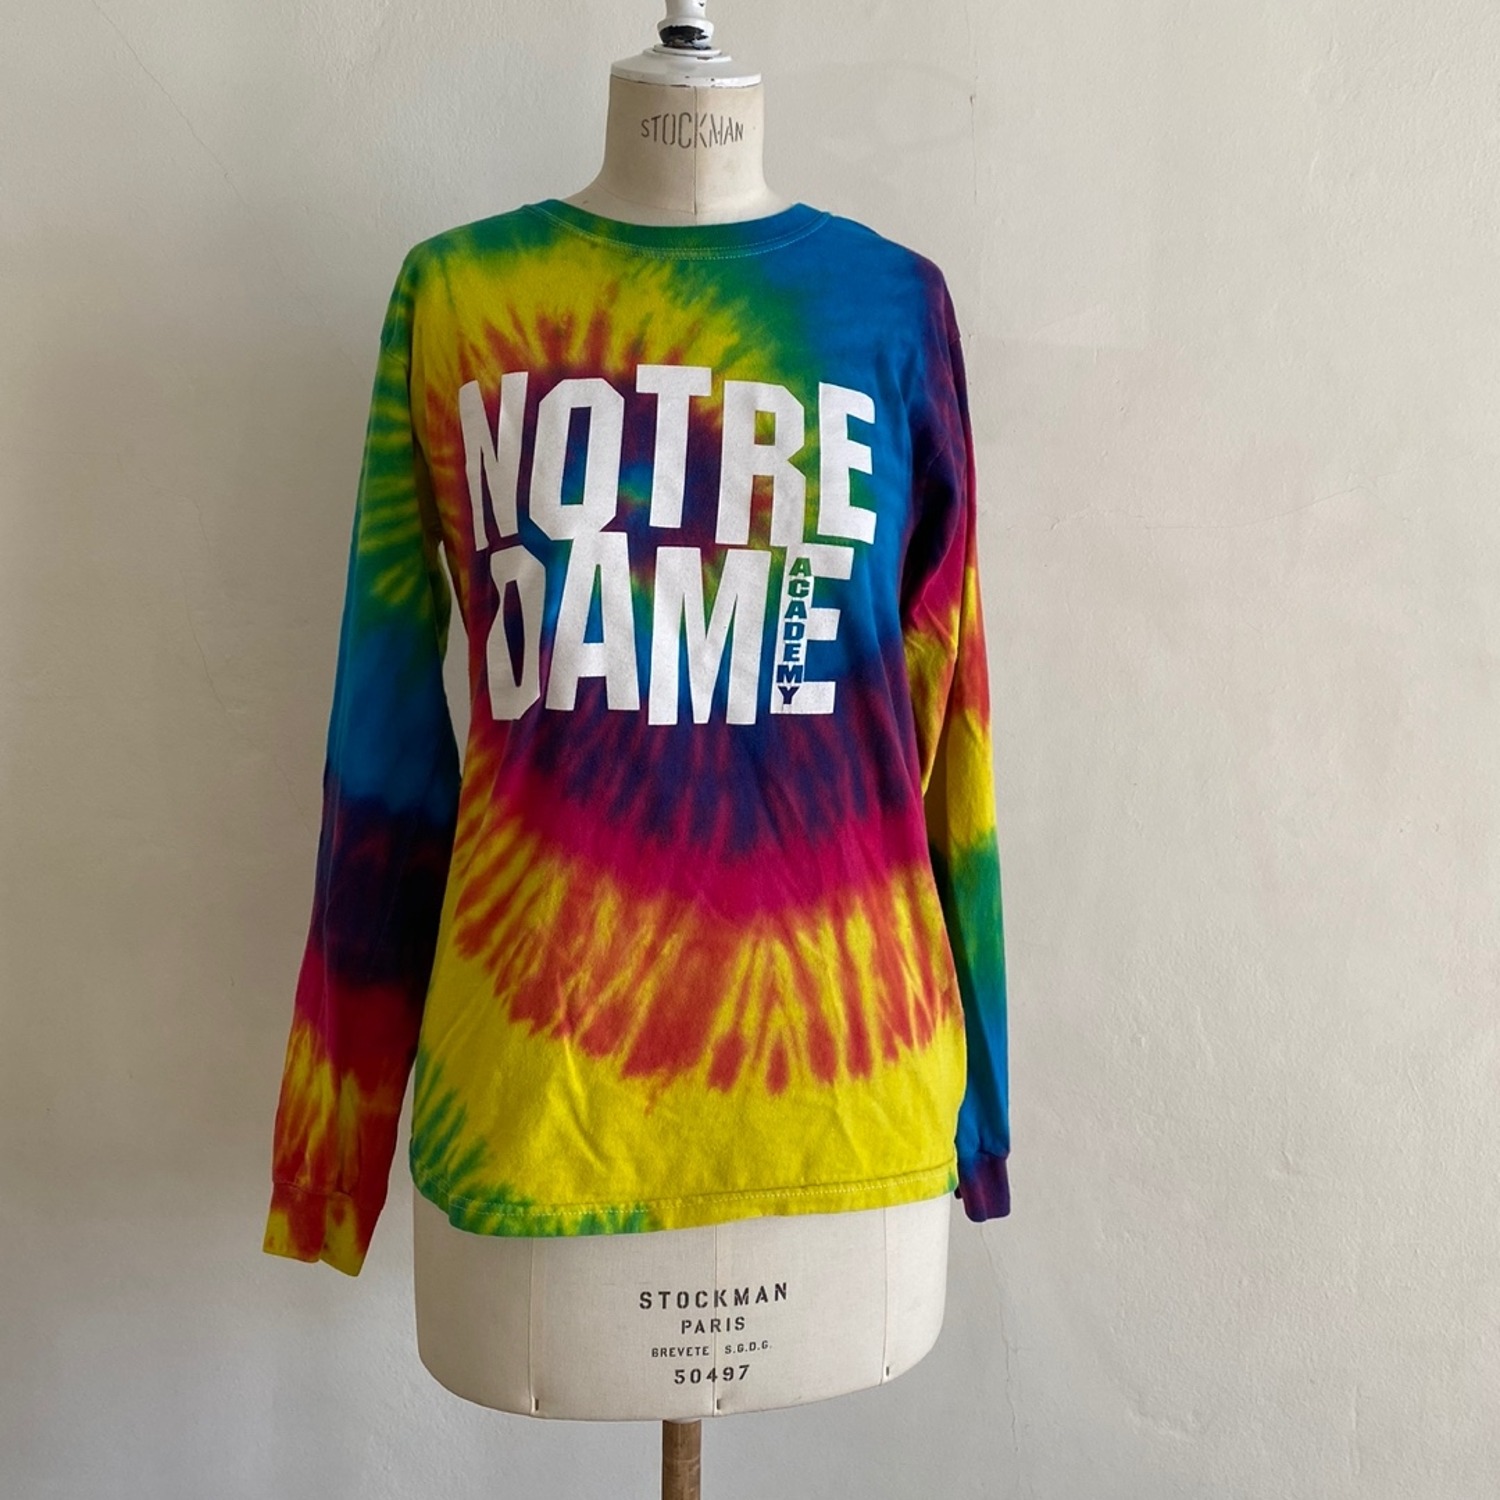 NOTRE DAME TIE DYED T-SHIRT